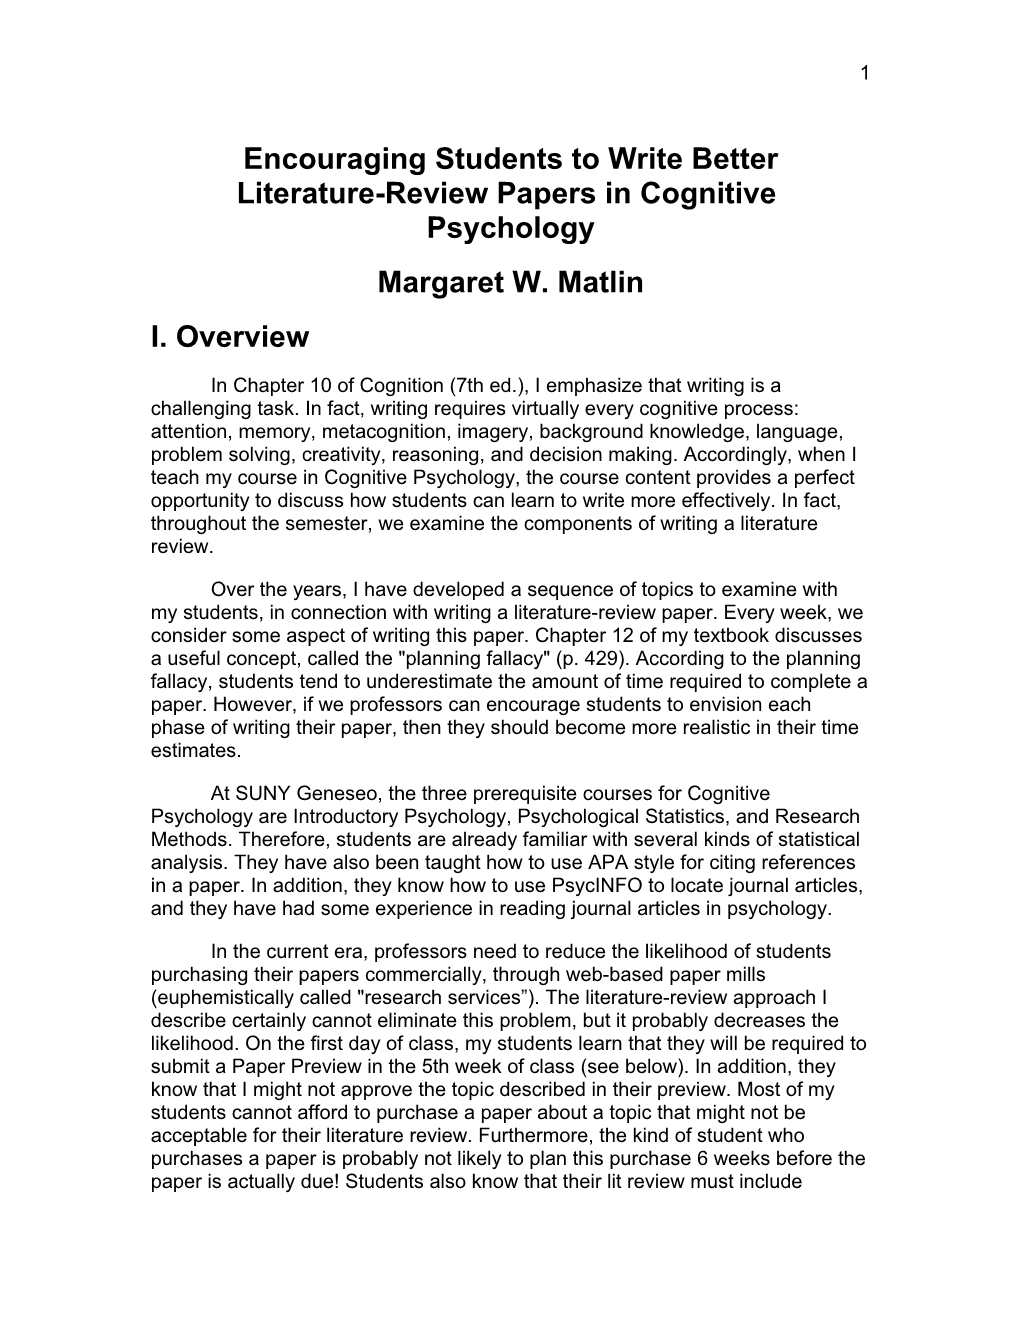 Encouraging Students to Write Better Literature-Review Papers in Cognitive Psychology